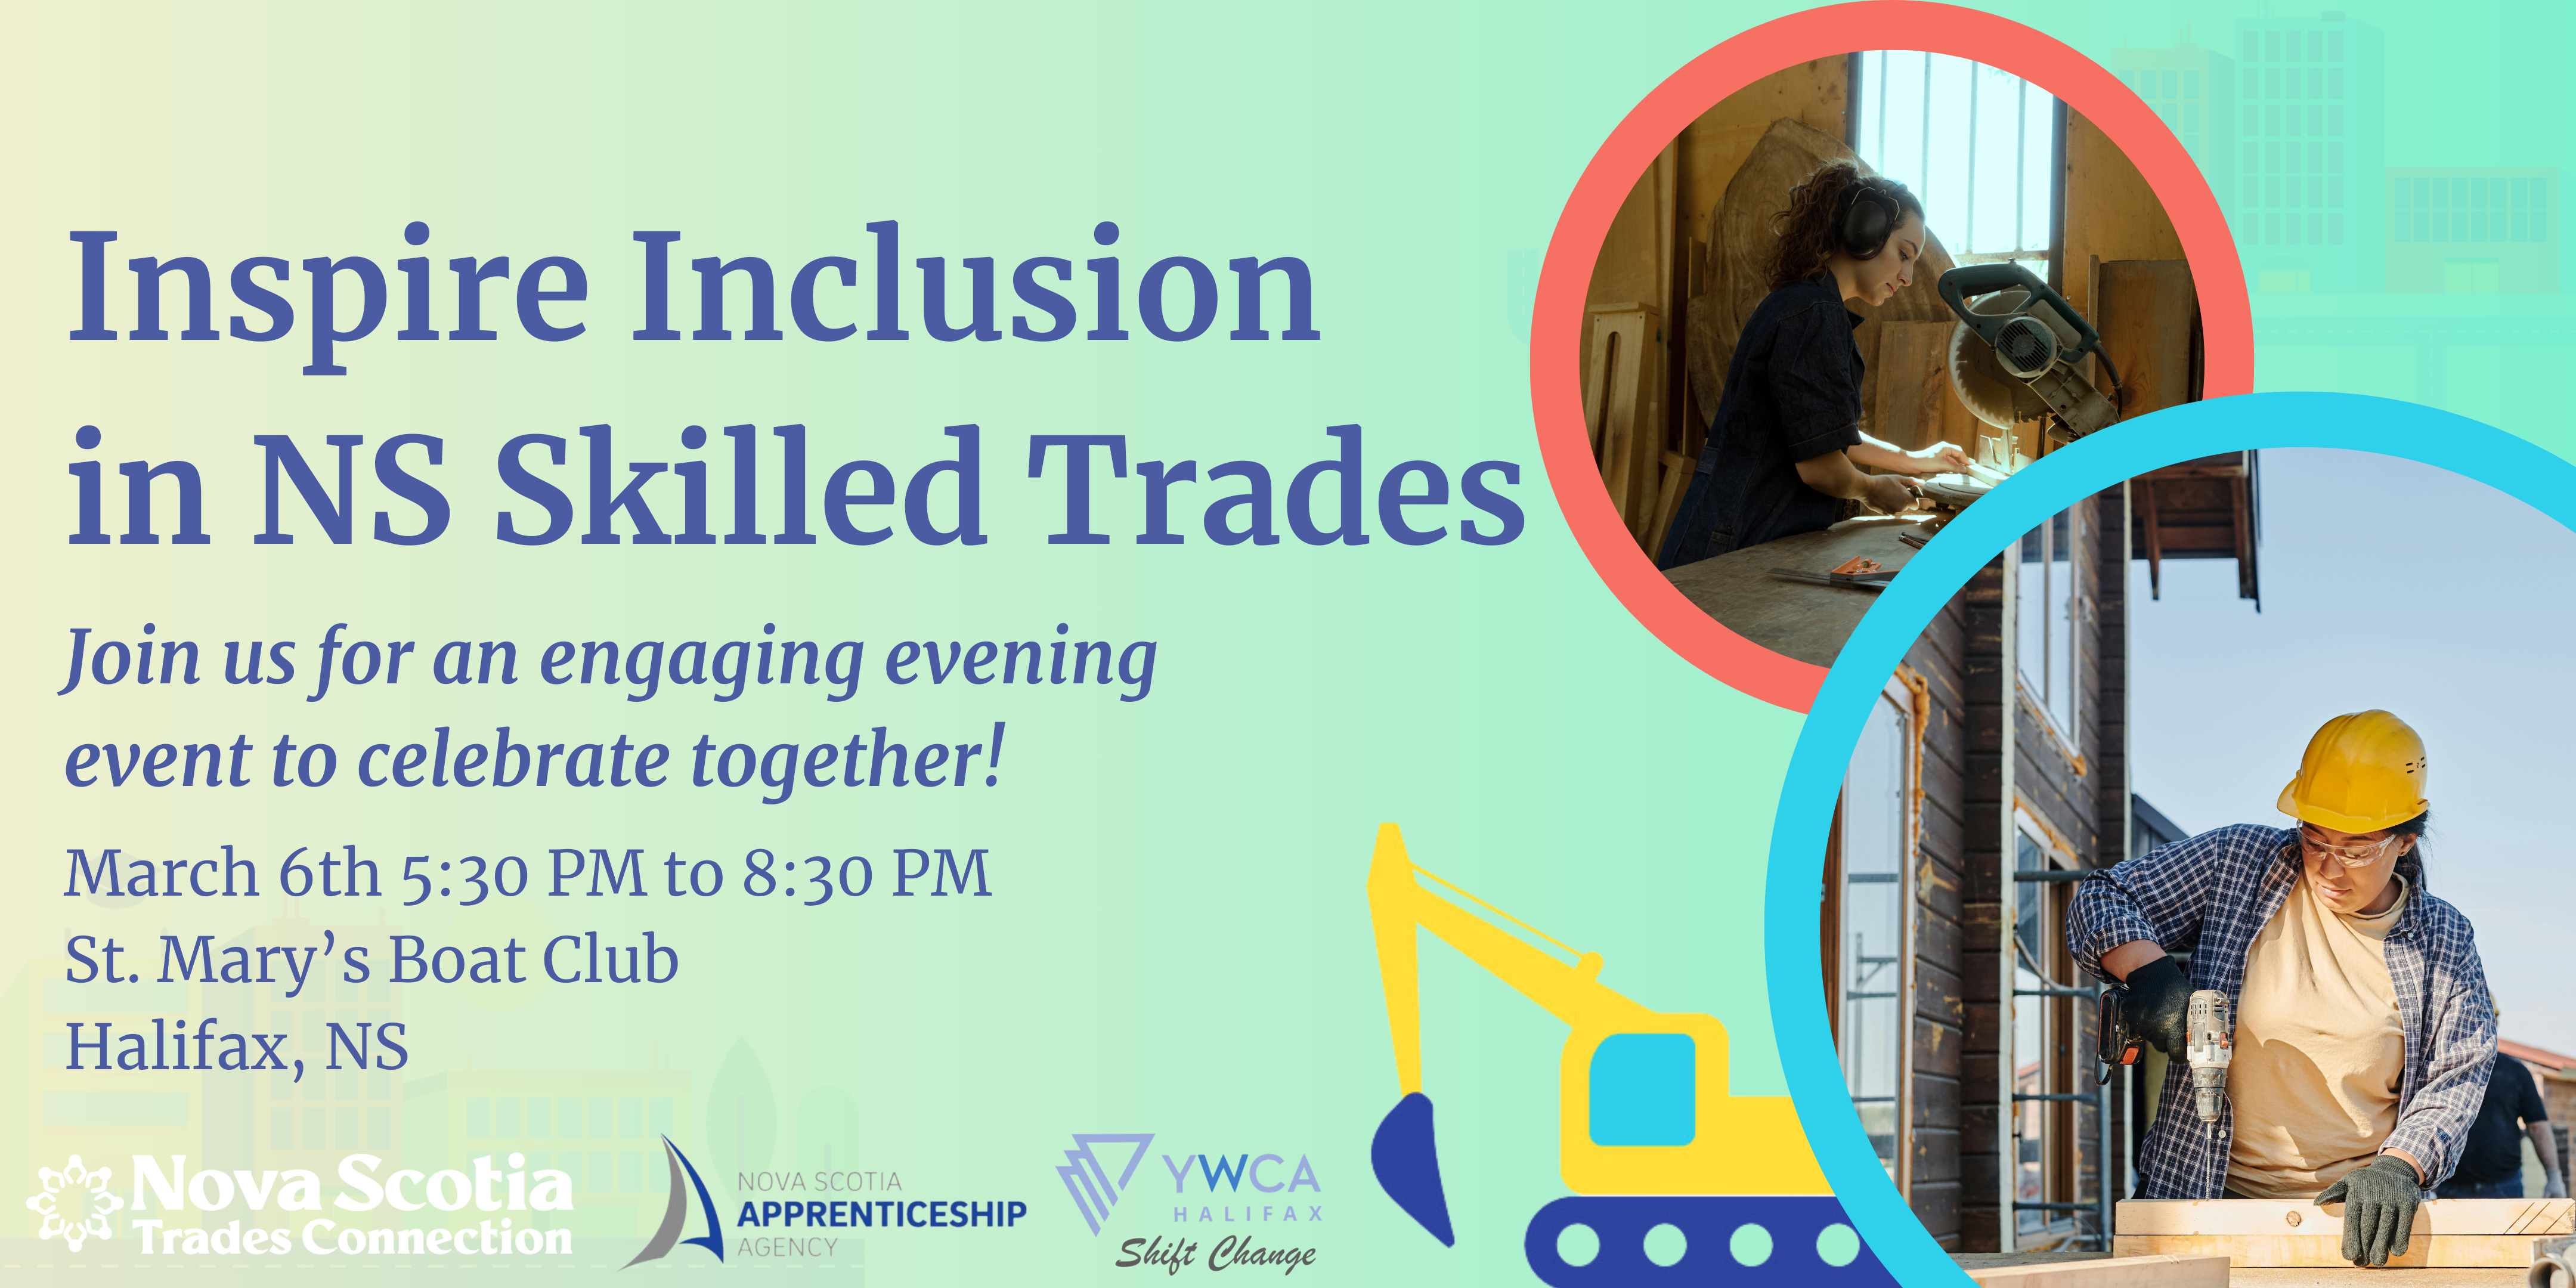 Inspire Inclusion in the NS Skilled Trades